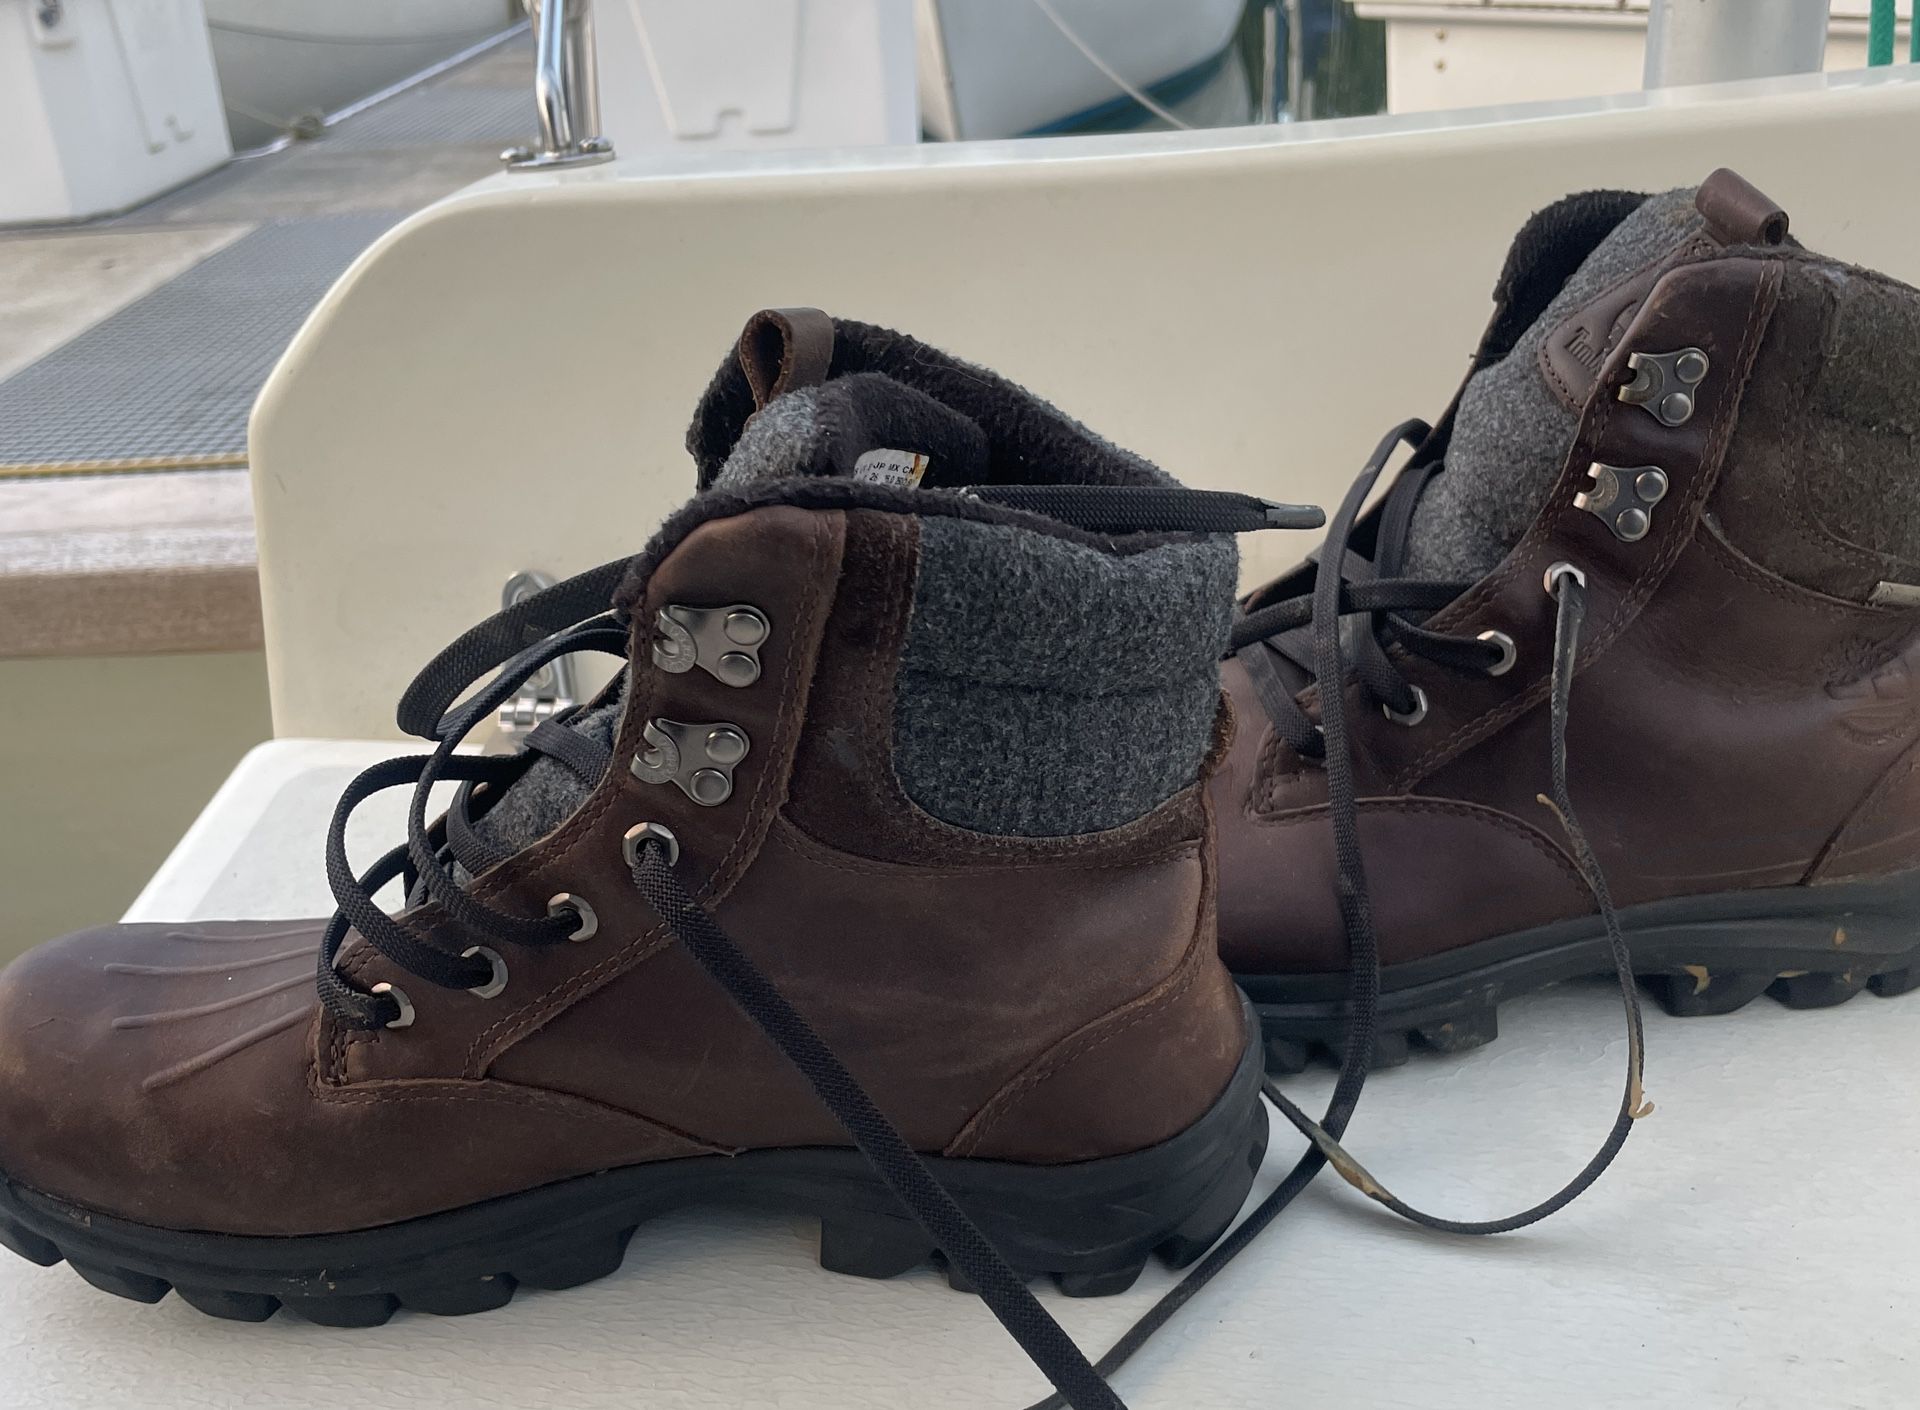 Timberland Hiking Boots. Men’s Size 10 - $40 (La Connor)